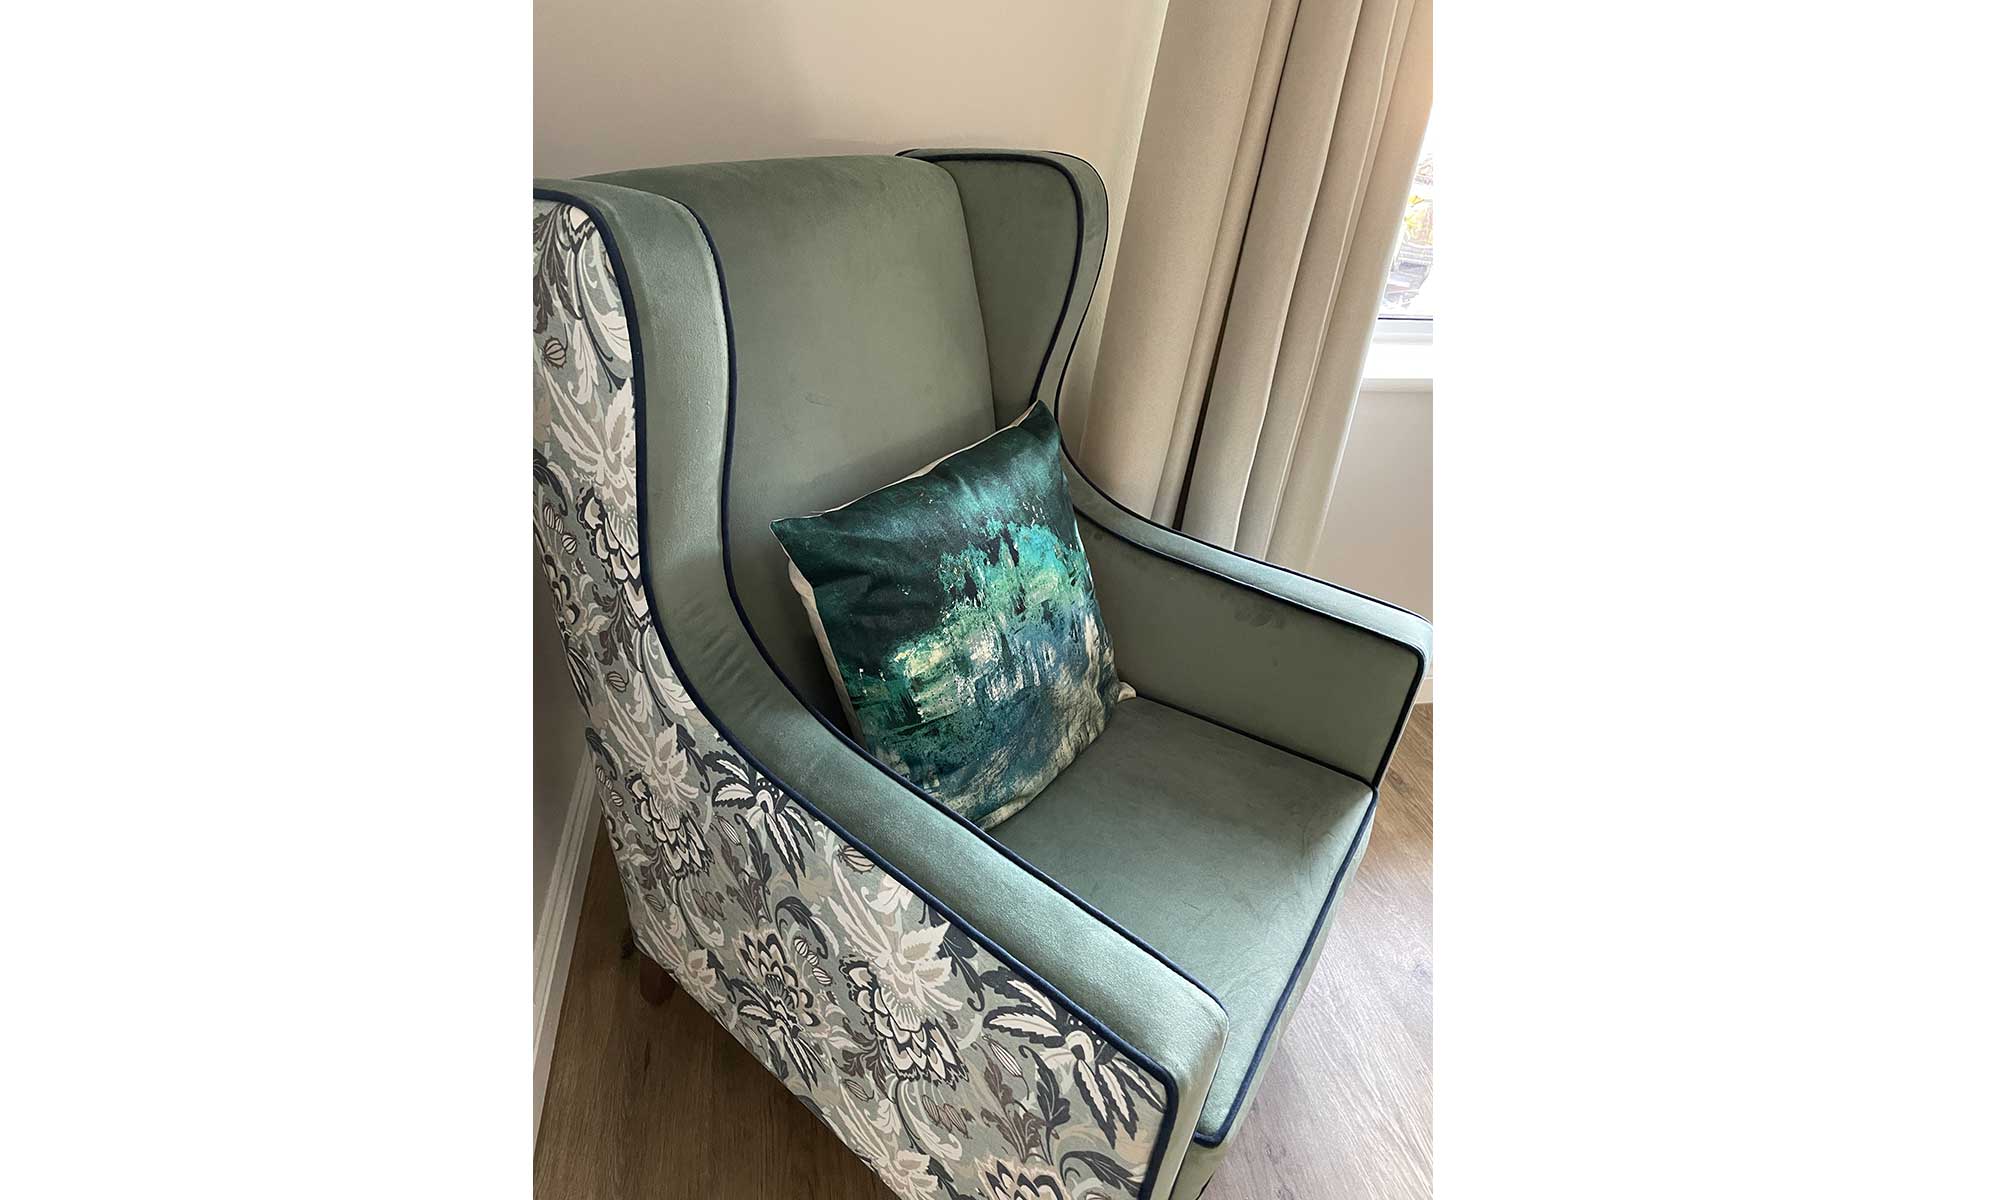 Orto Wing Back Chair in a bedroom with green cushion on the seat